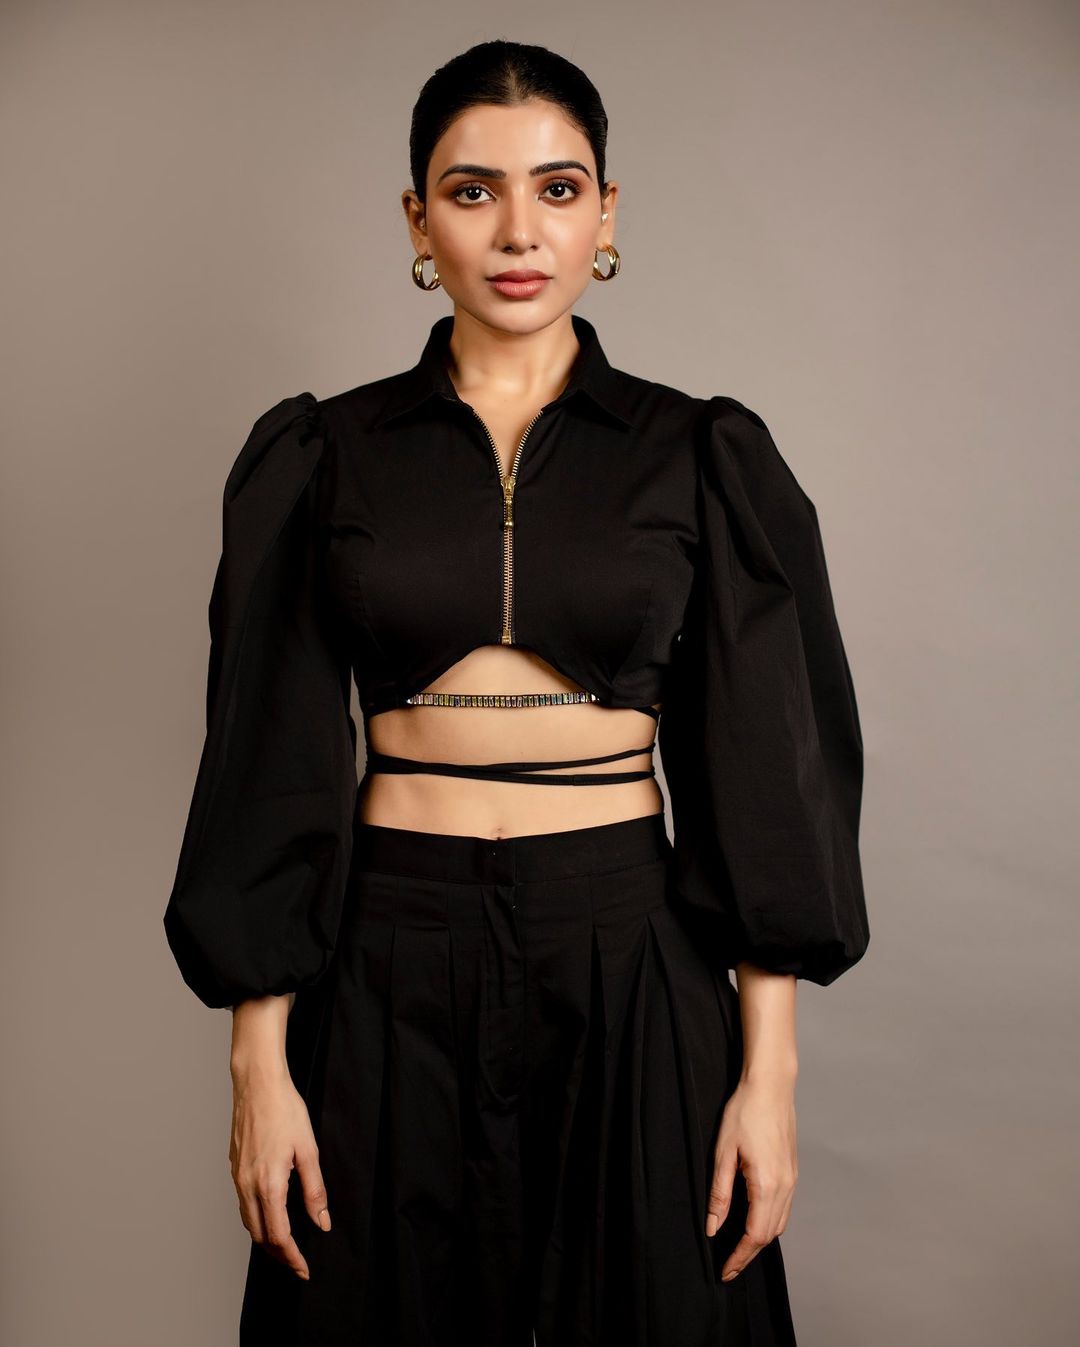 Samantha Ruth Prabhu Photoshoot in Black Outfit by Preetham Jukalker Collection 11/20/2021 2